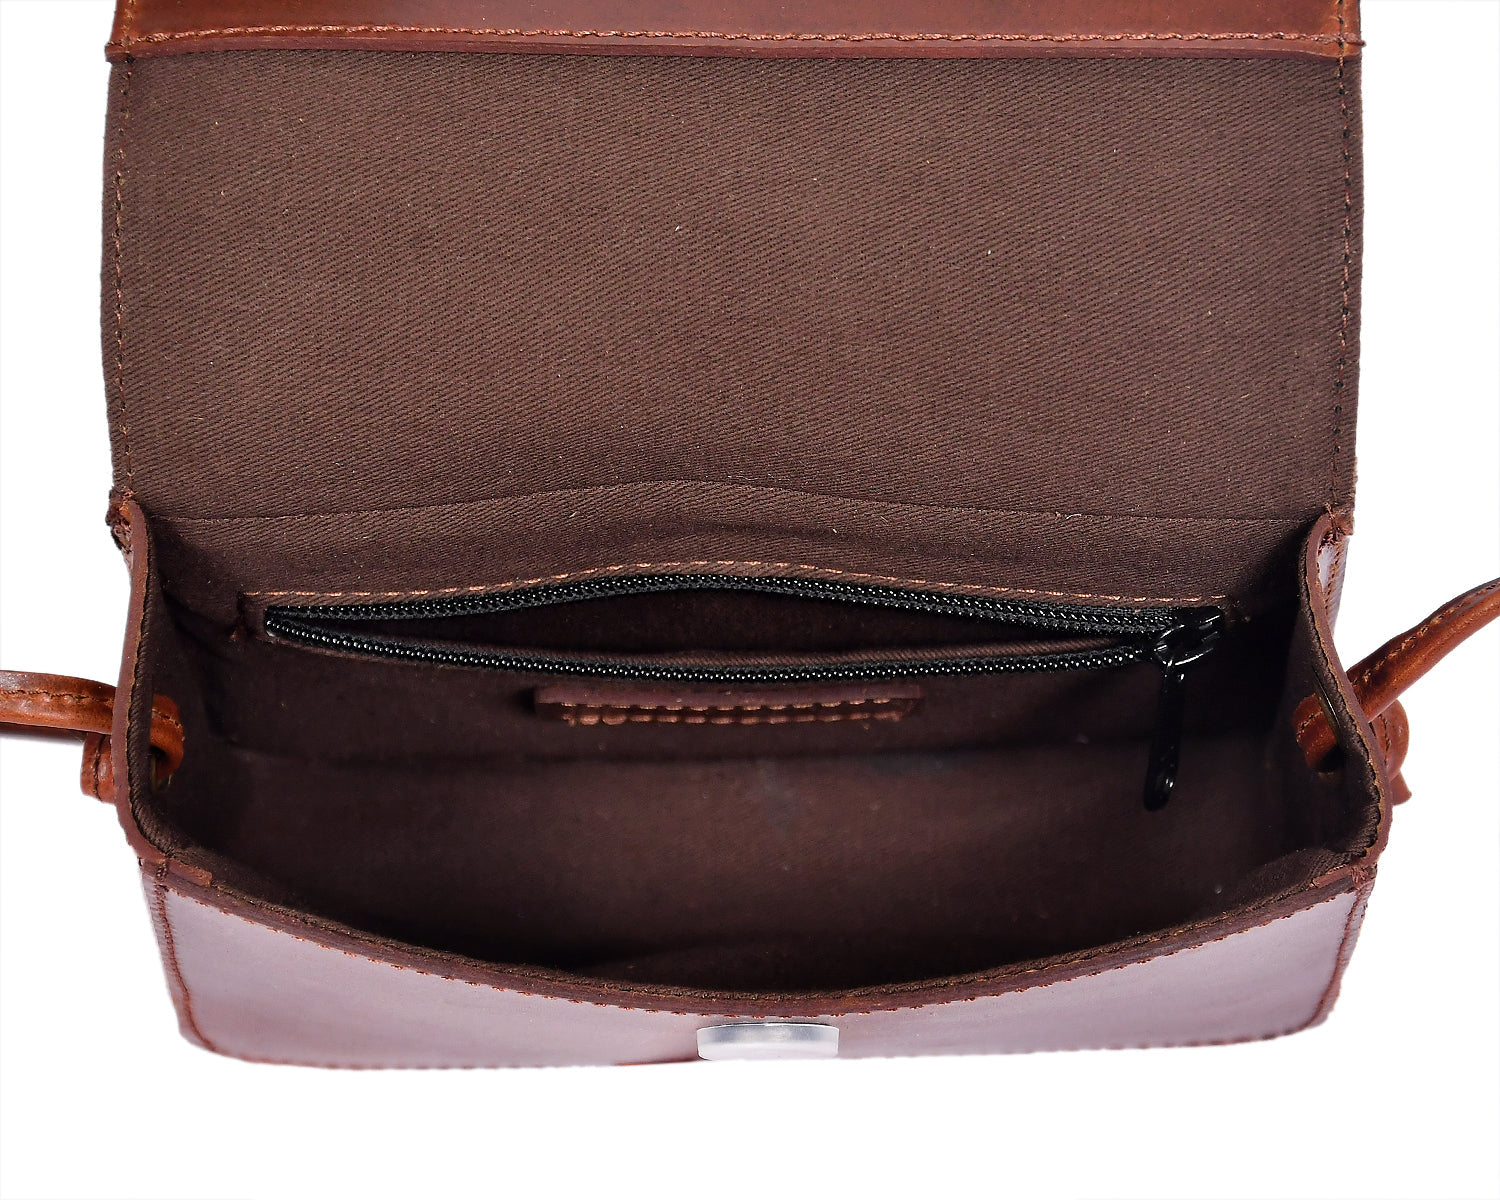 Elevate Your Style with our Brown Leather Sling Bag with Hair-On Detailing. - CELTICINDIA